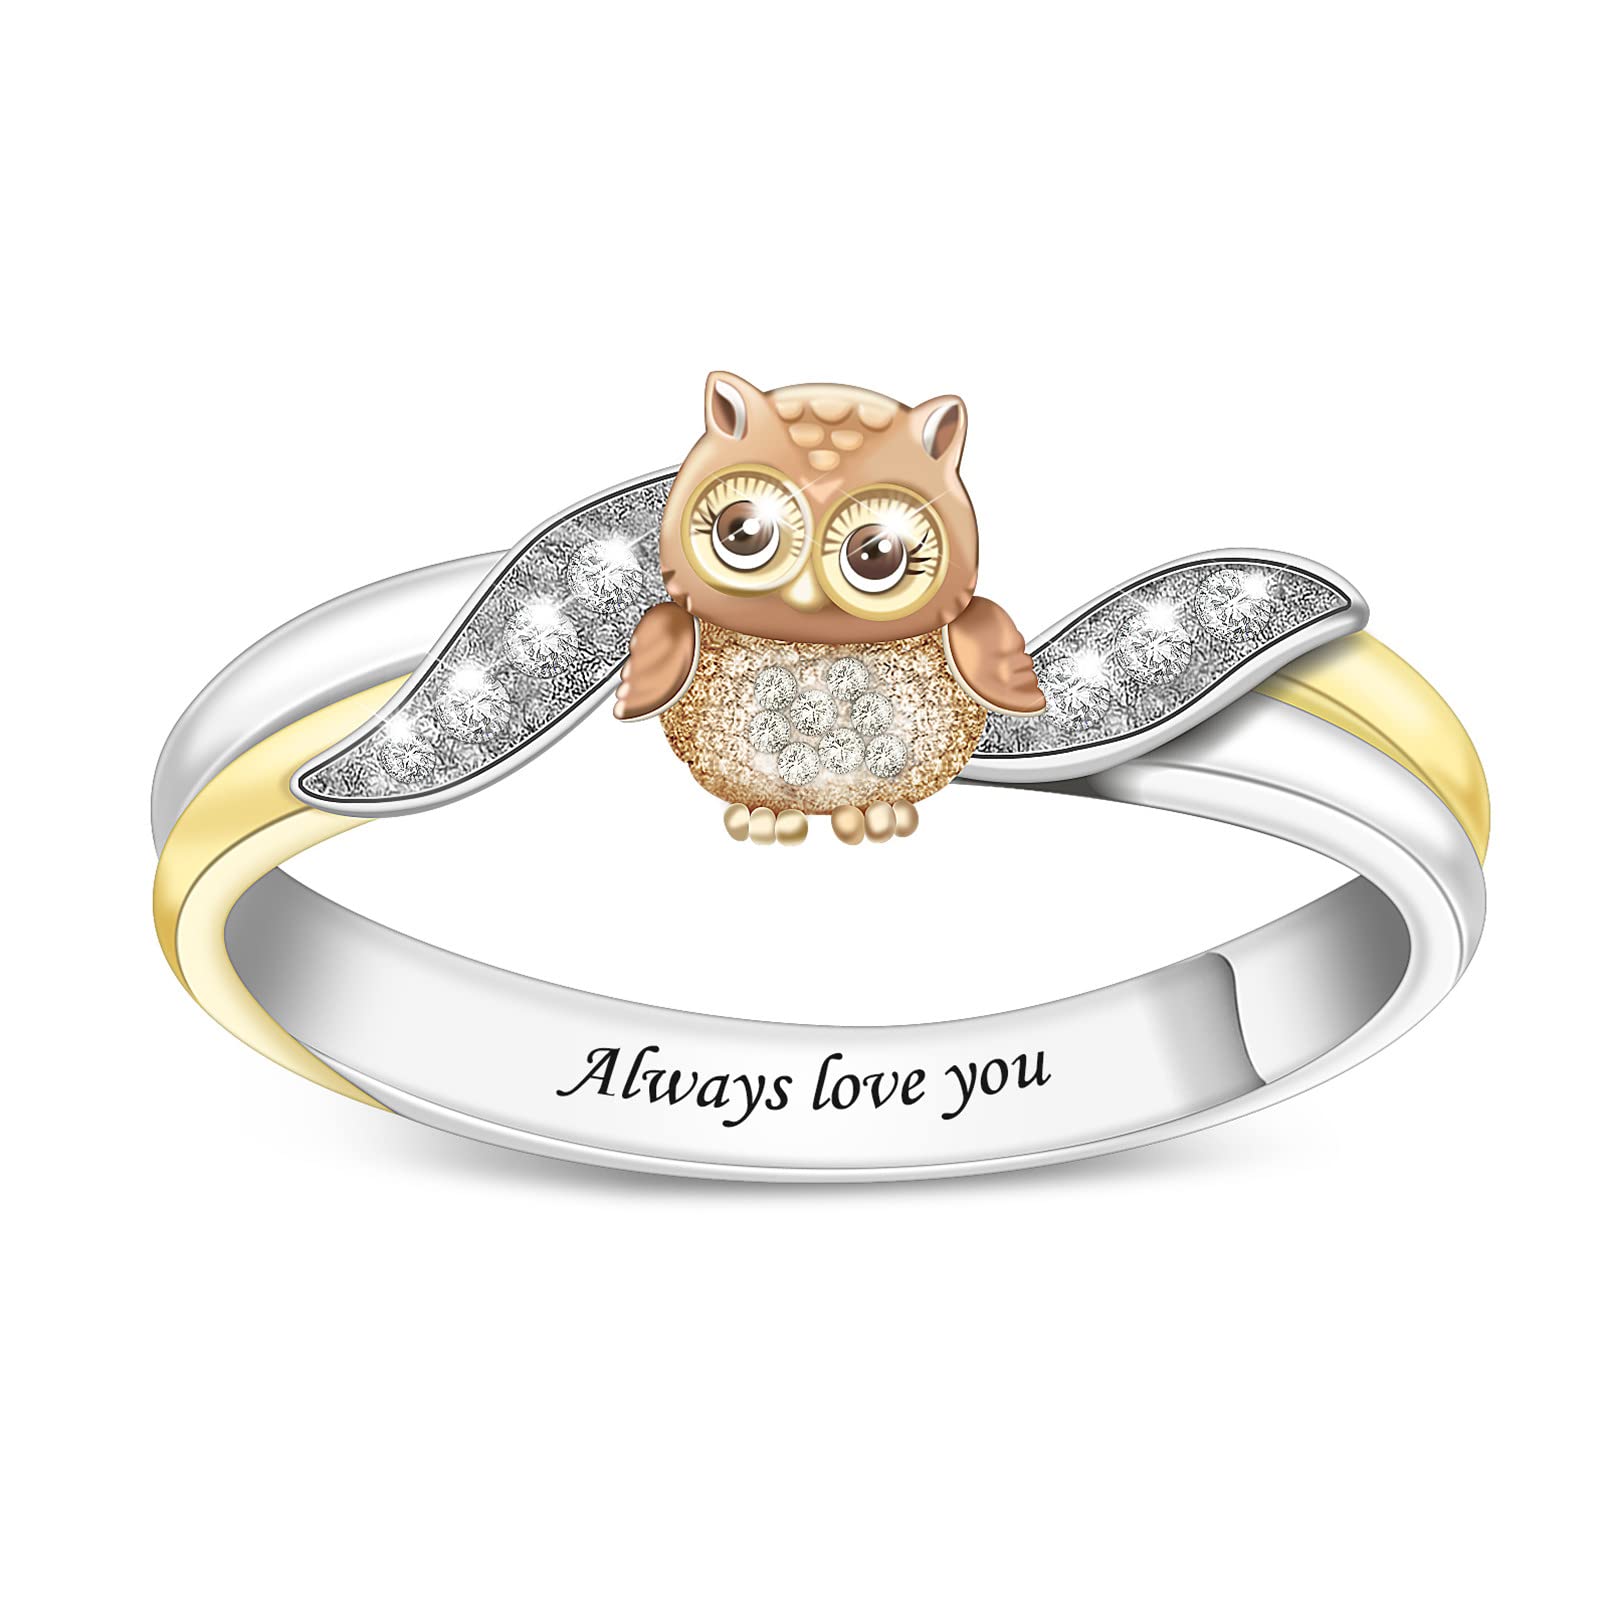 Personalized Owl Shaped Ring and Free Engraving.